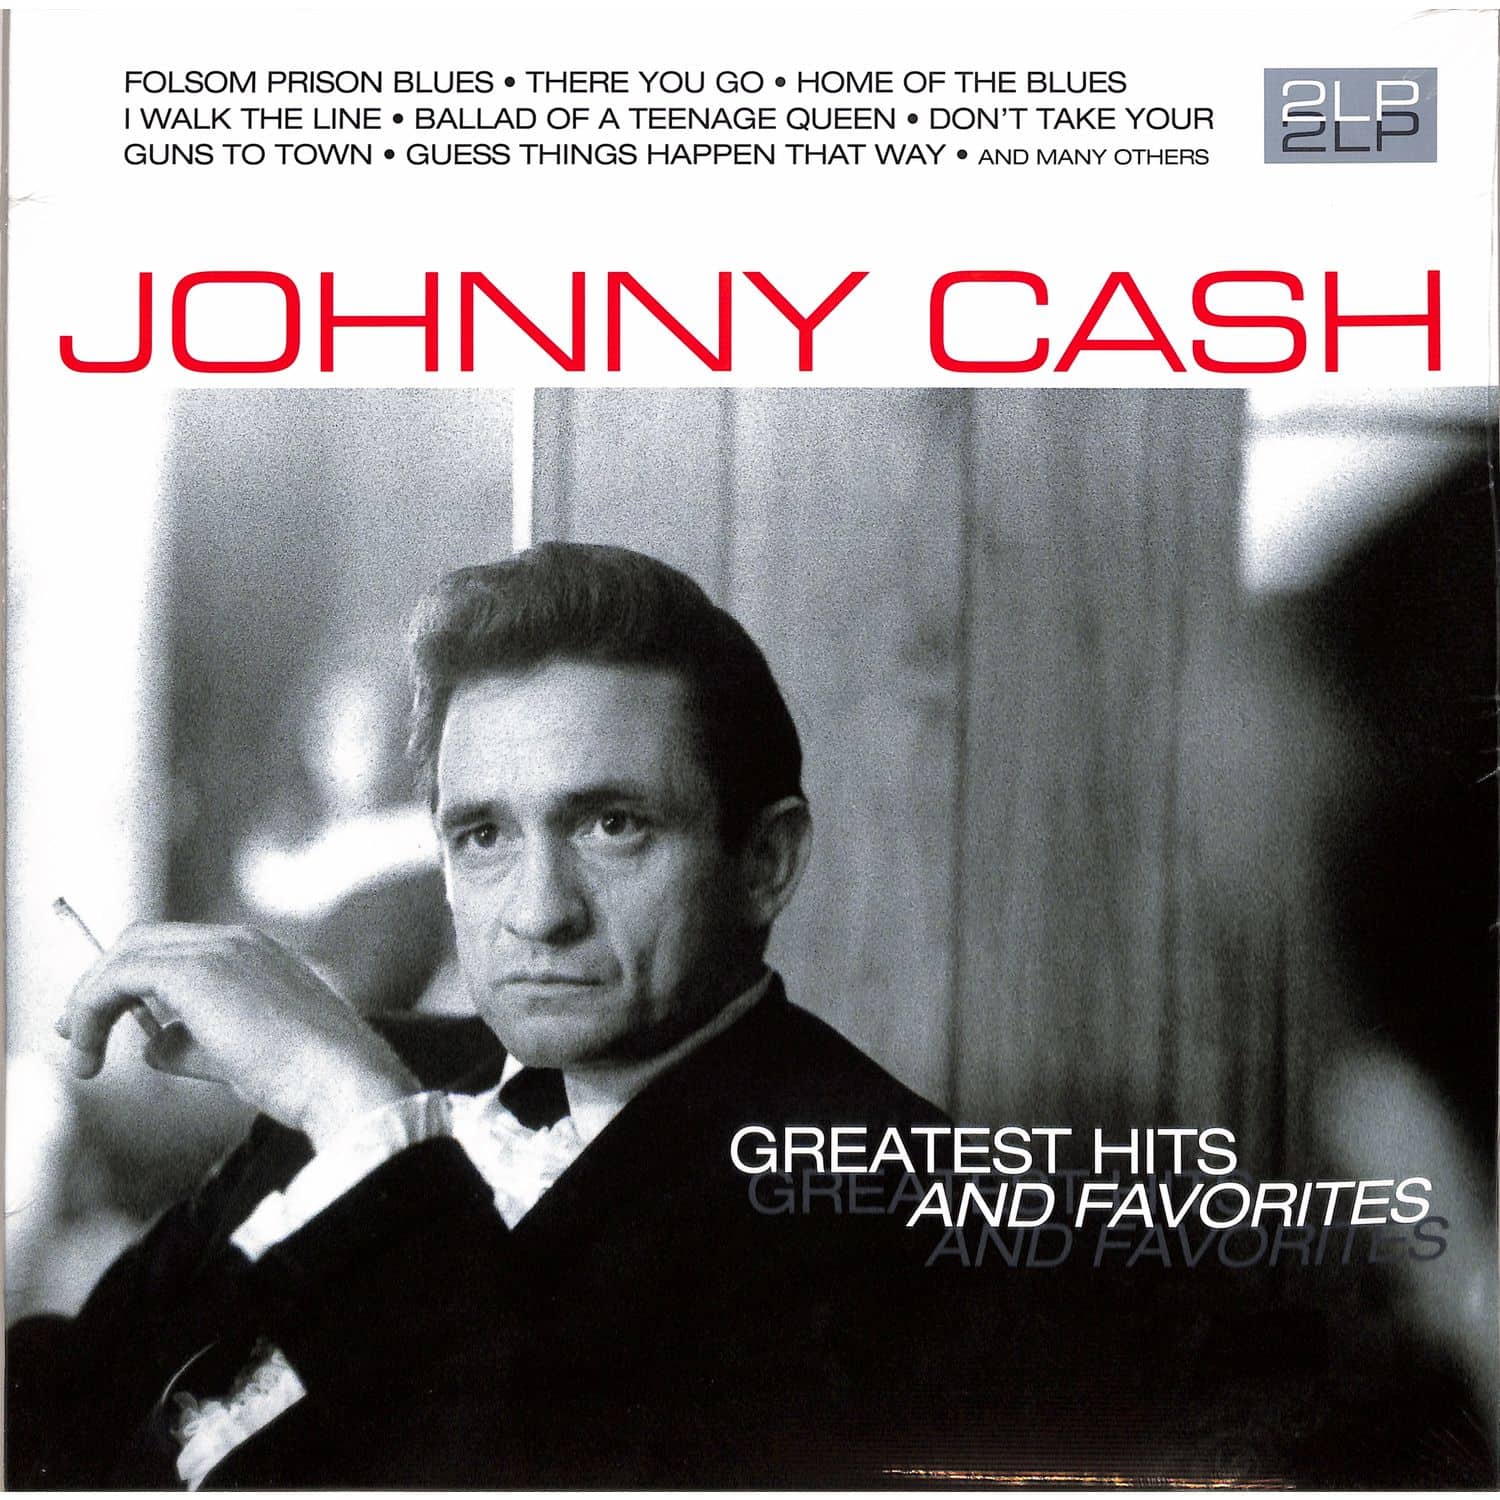 Johnny Cash - GREATEST HITS AND FAVORITES 